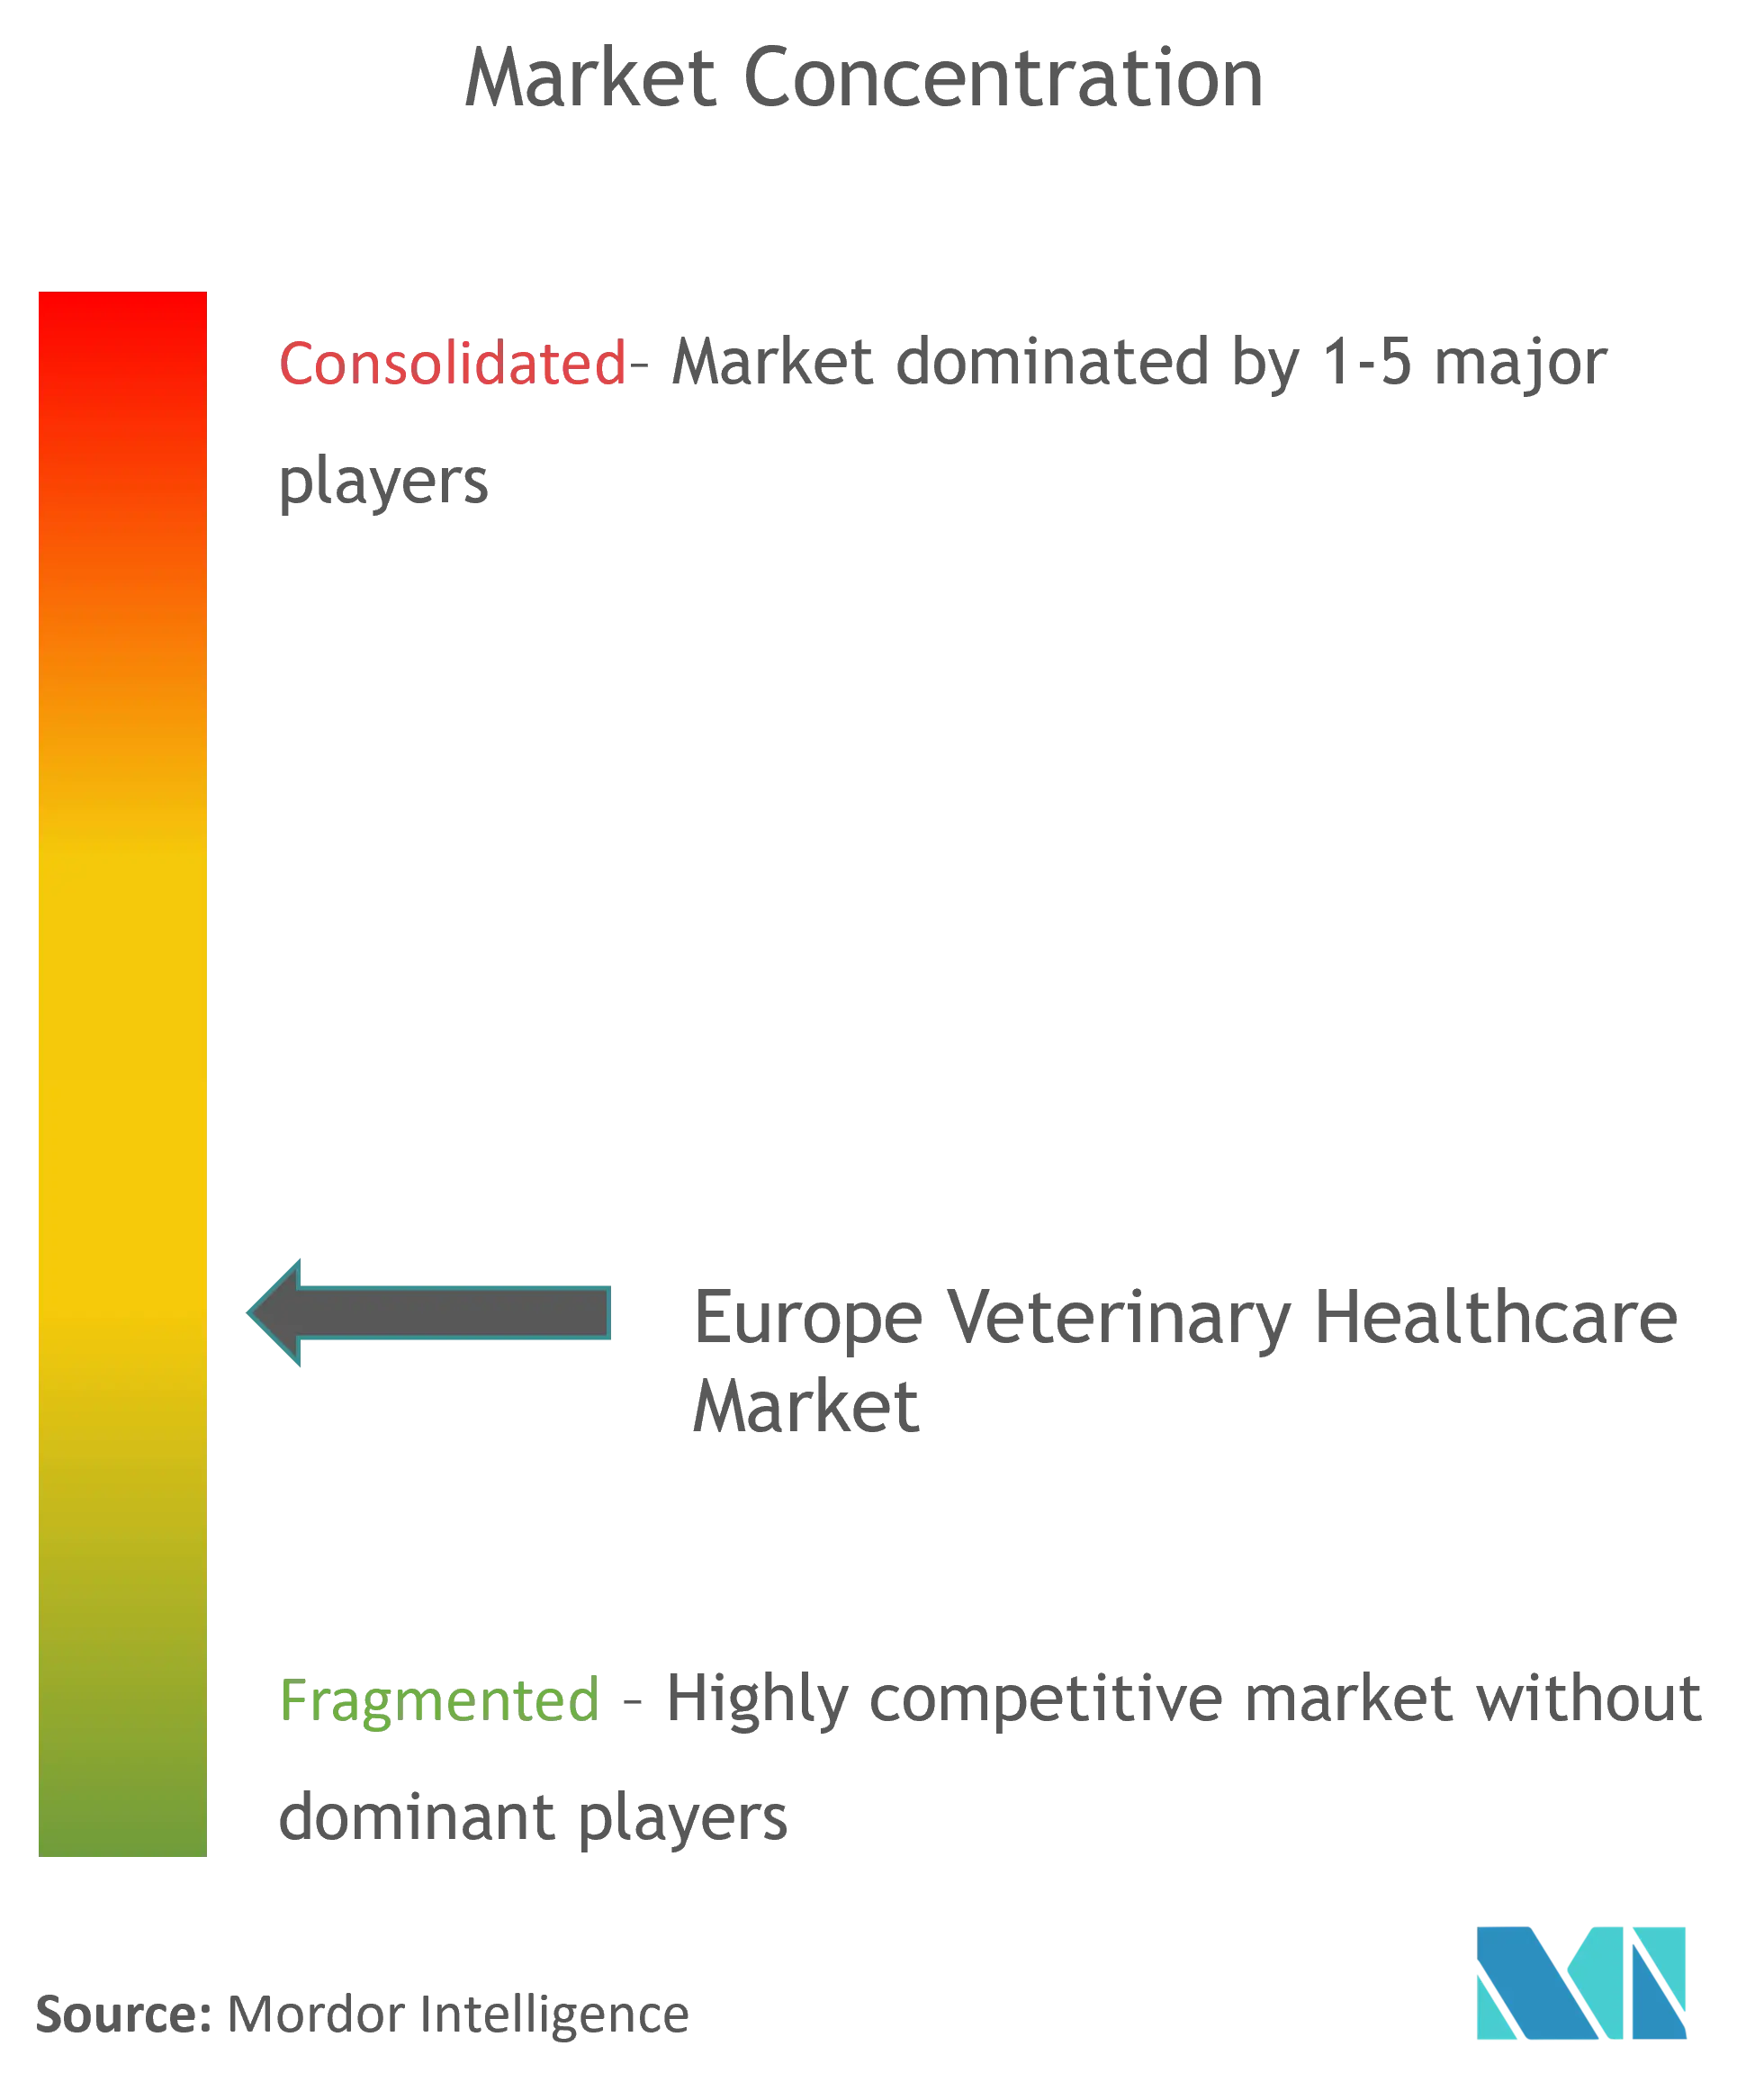 Europe Veterinary Healthcare Market Concentration